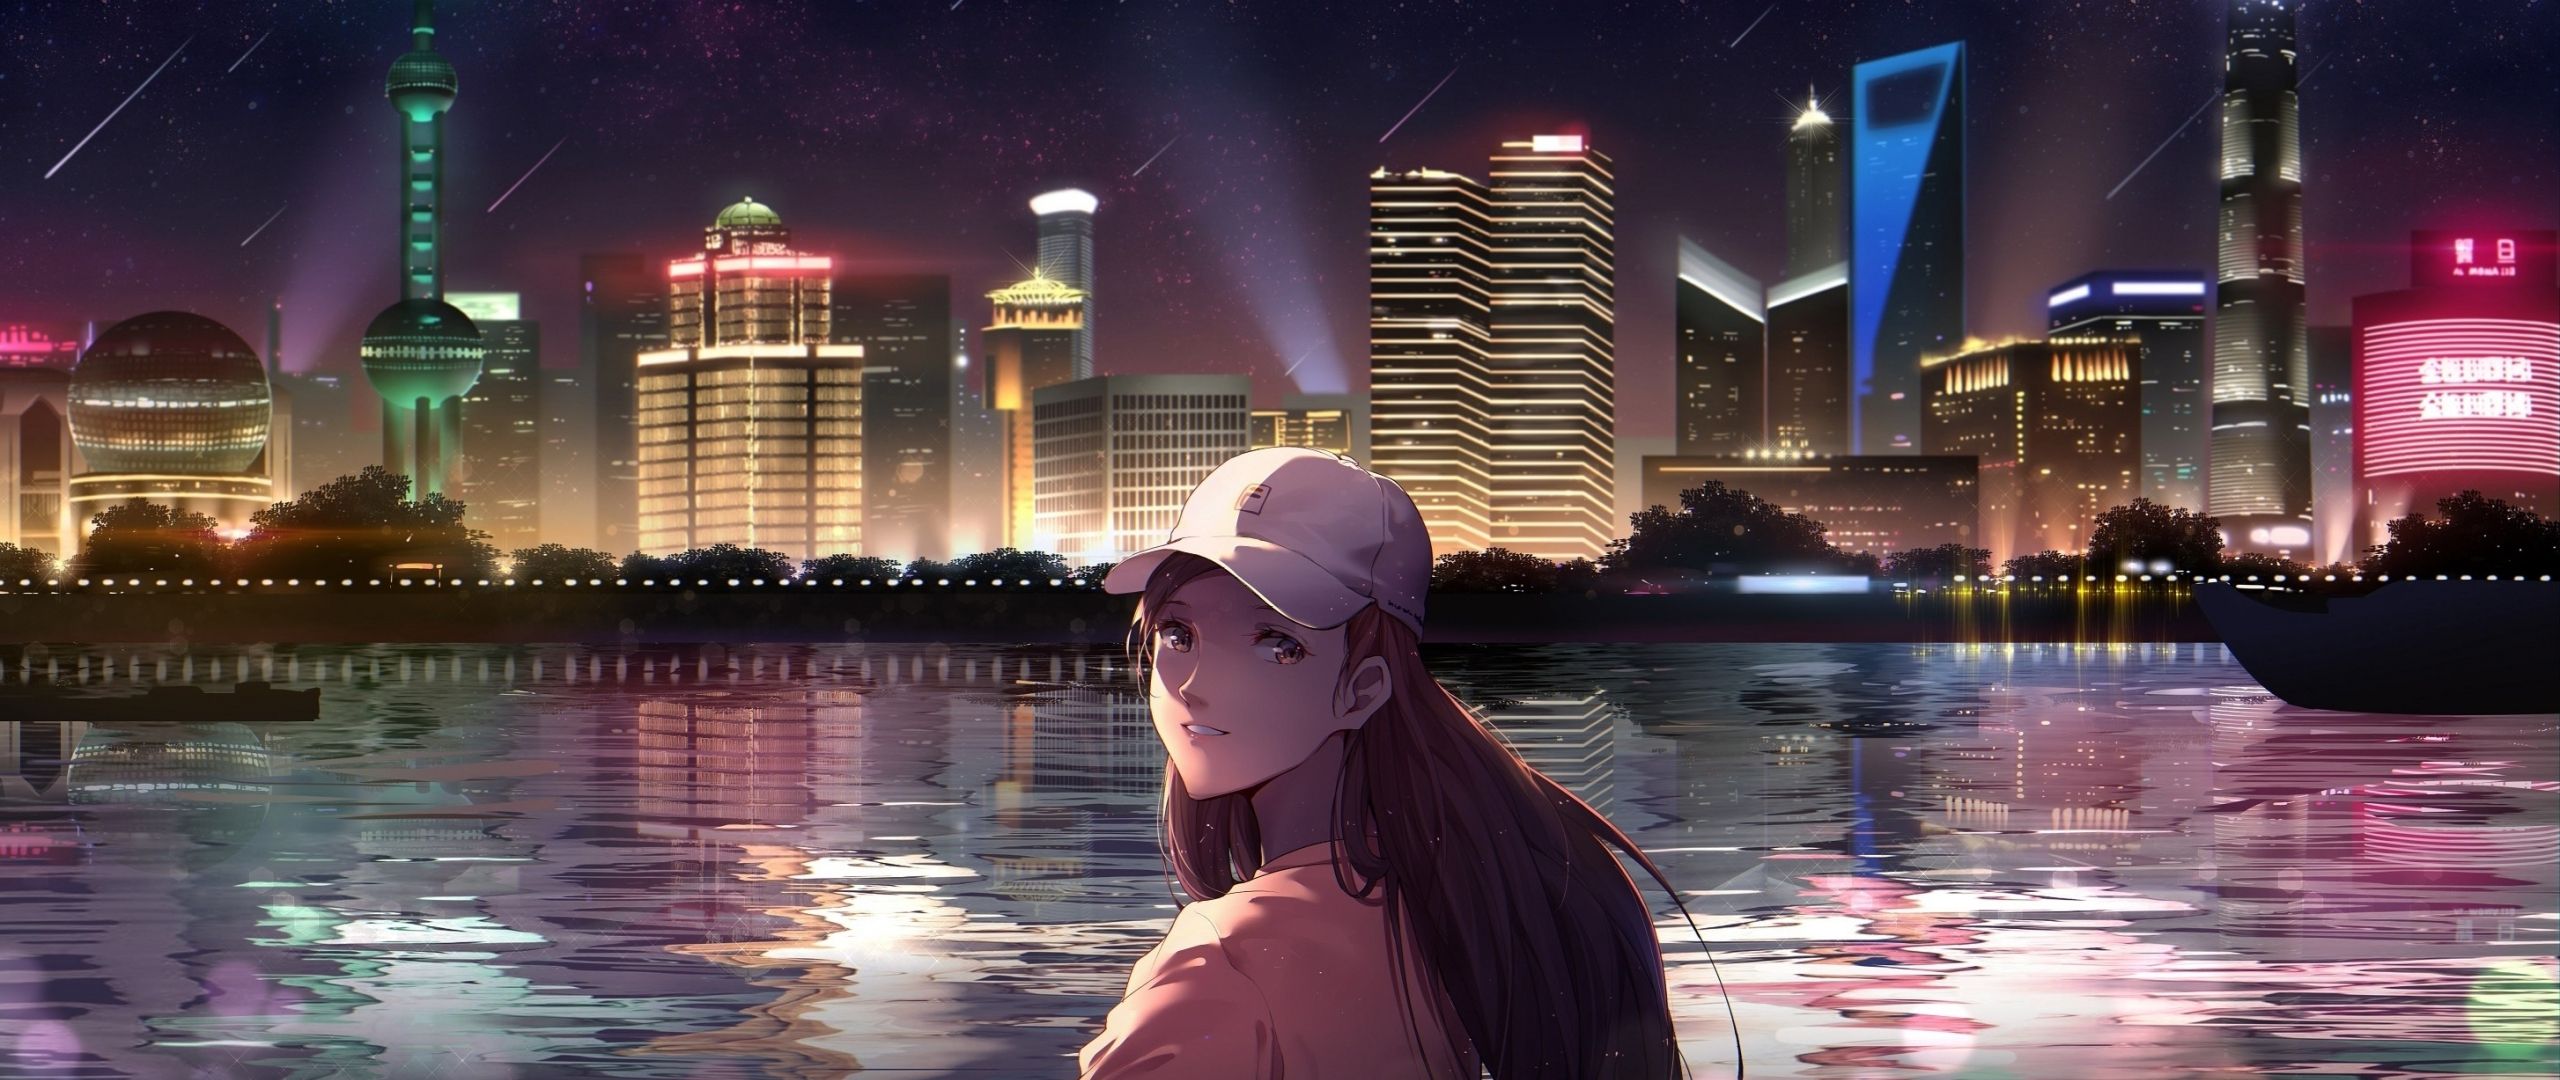 Download 2560x1080 wallpaper night out, city, anime girl, original, dual wide, widescreen, 2560x1080 HD image, background, 20506